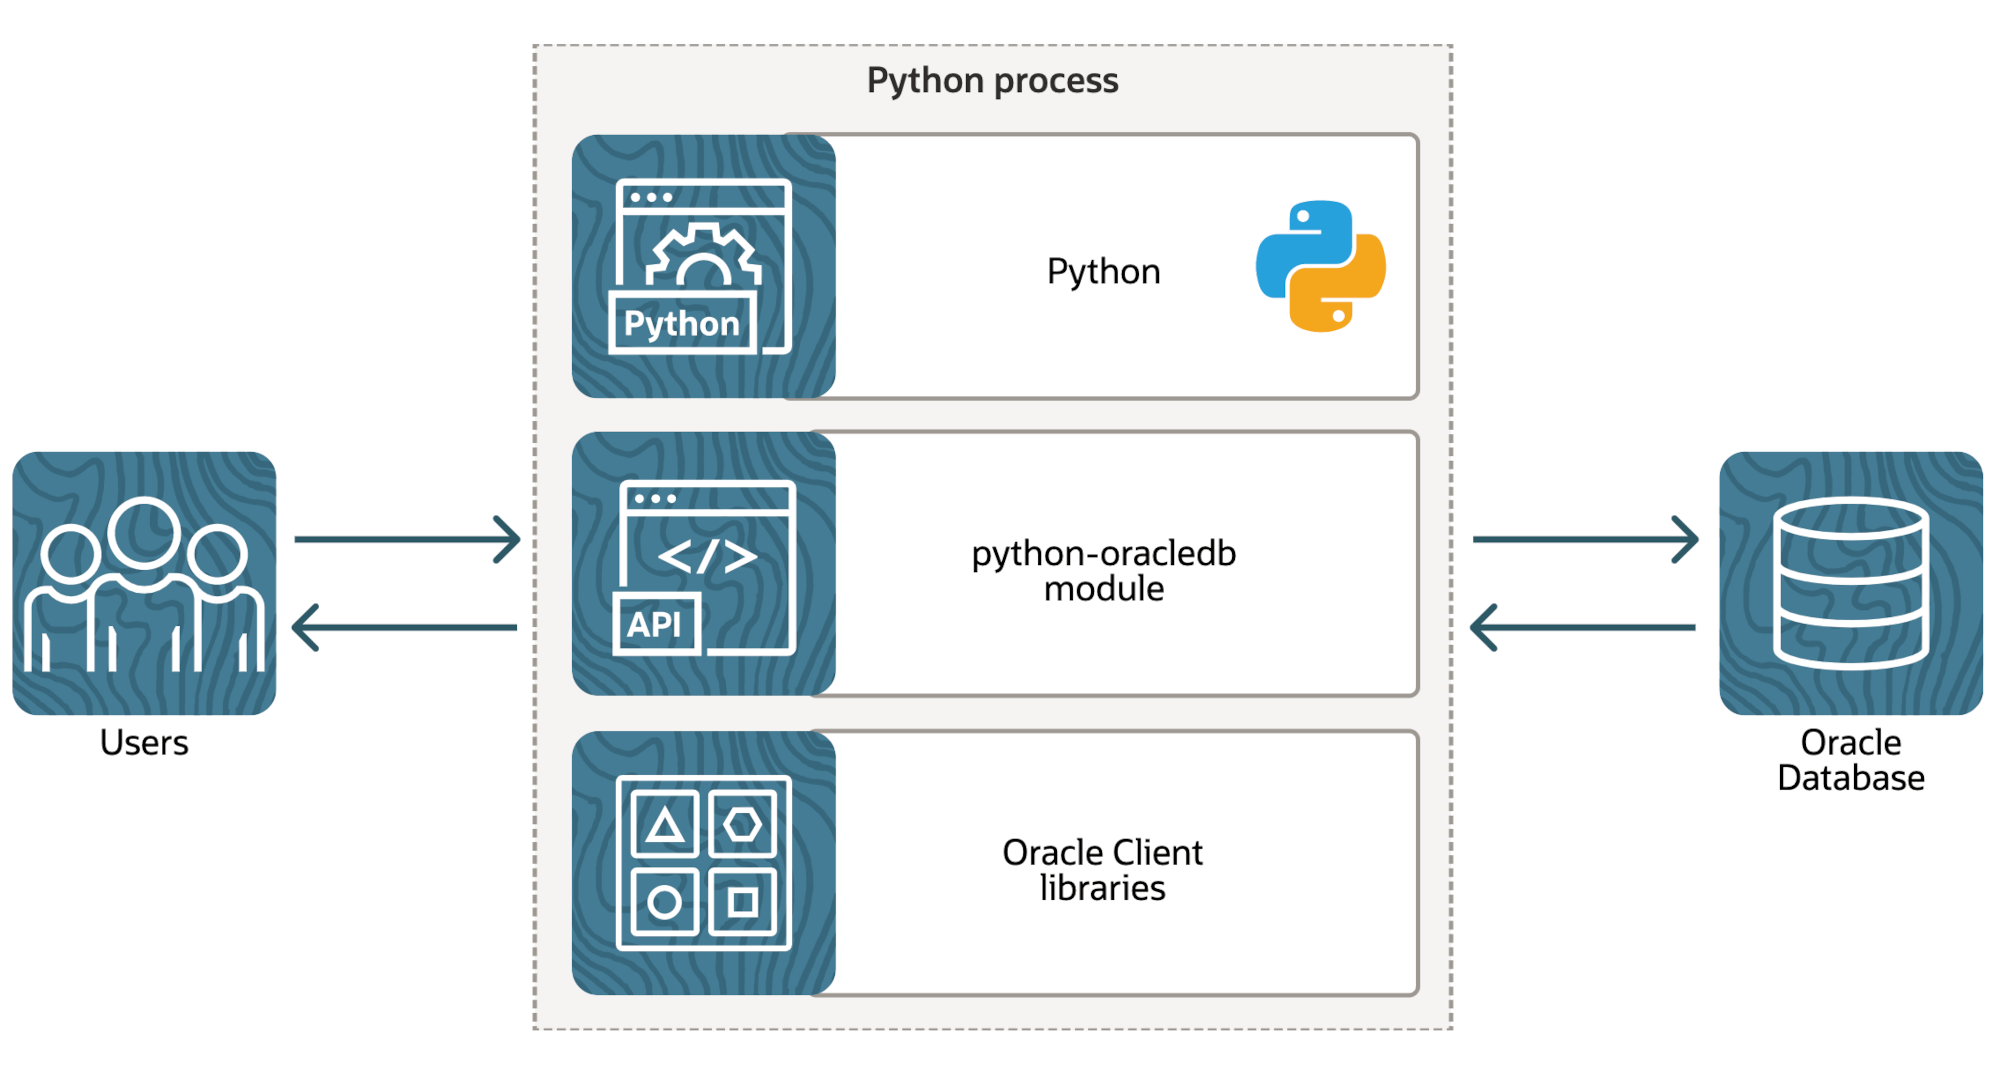 architecture of the python-oracledb driver in Thick mode